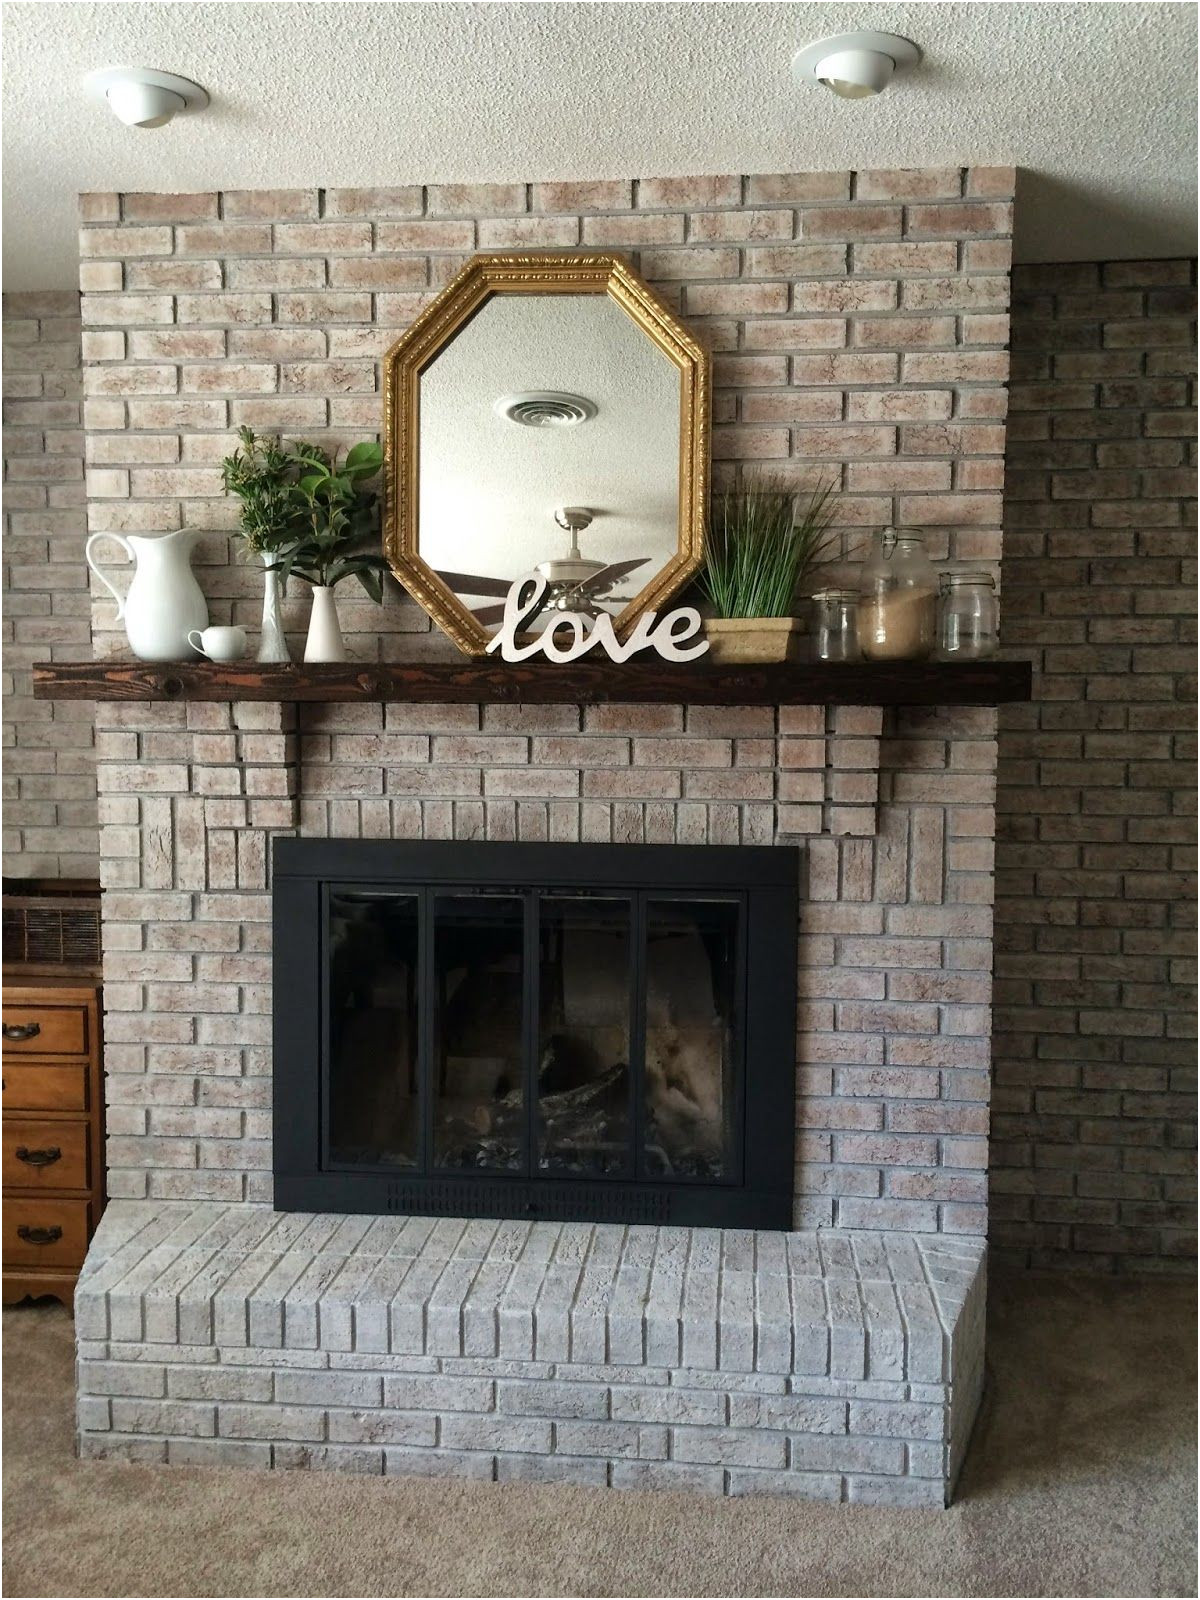 New Ideas to Paint Fireplace